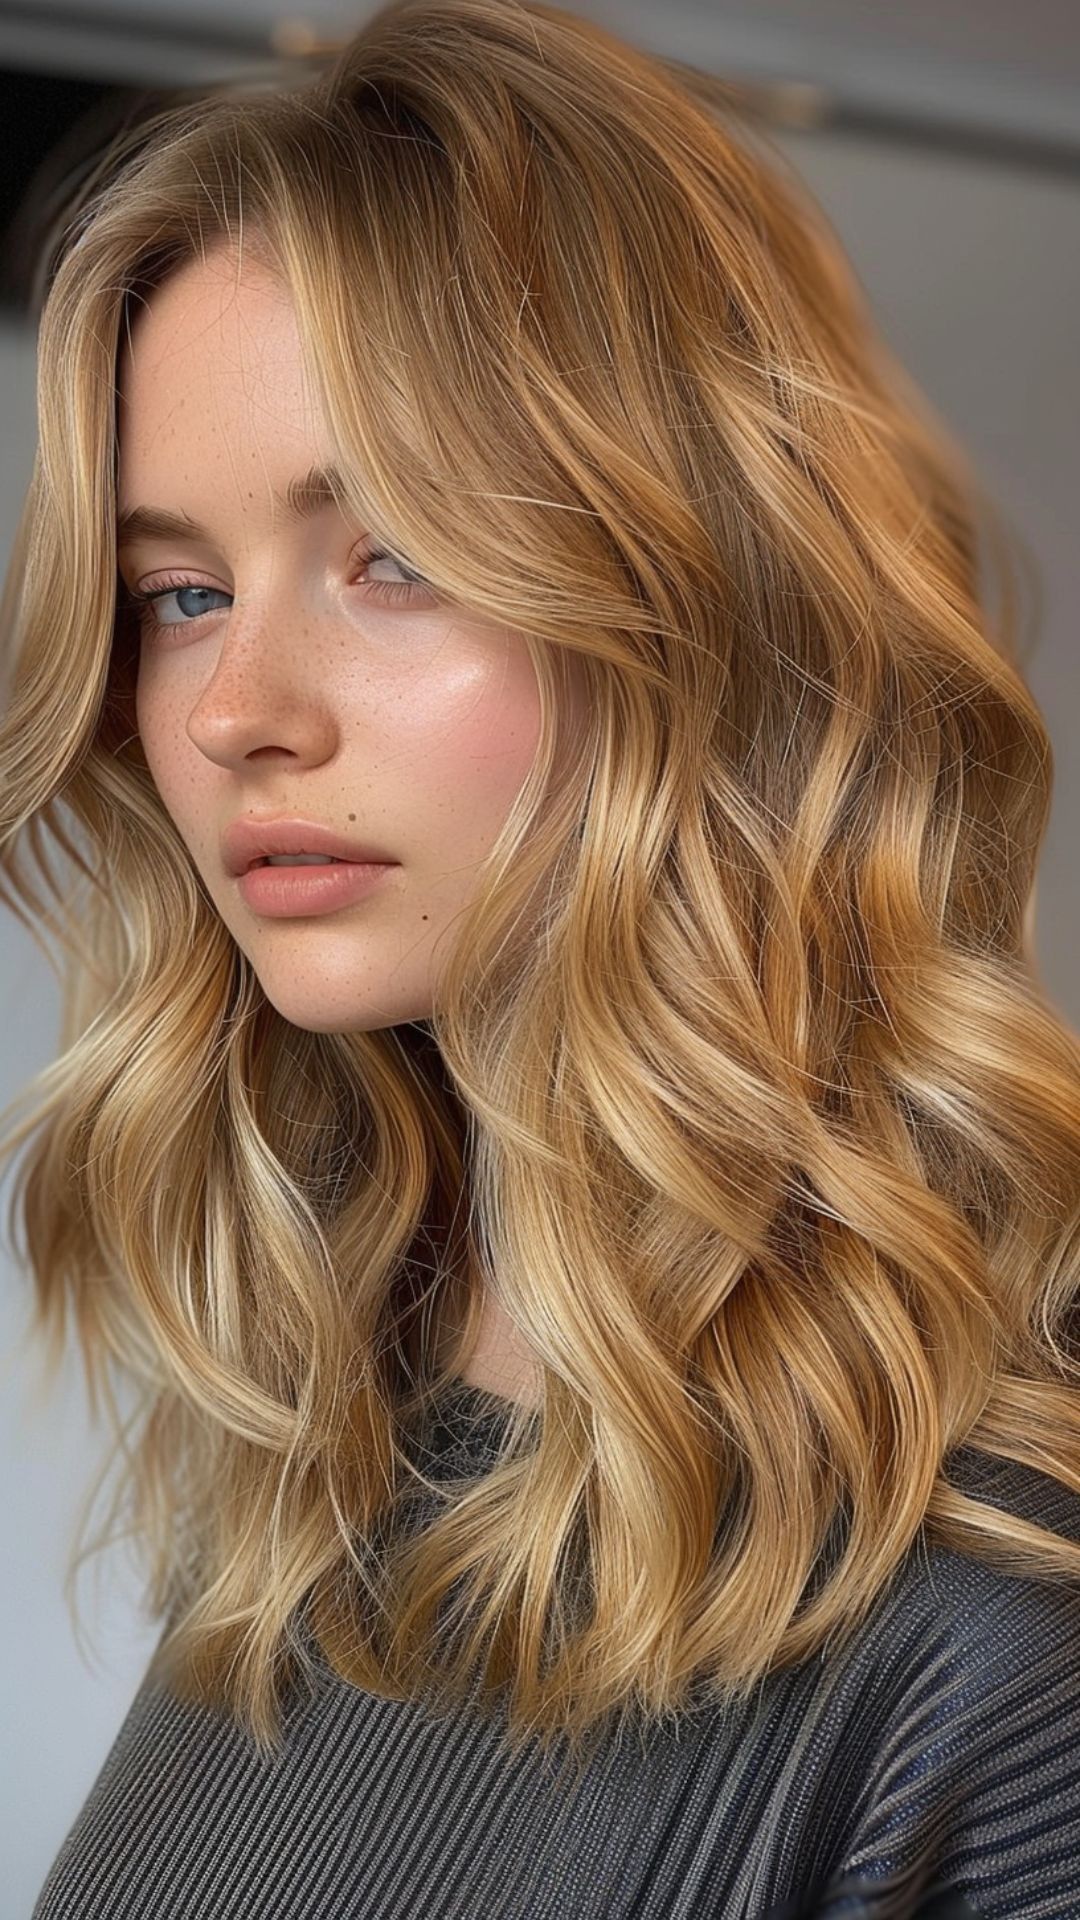 Exploring the Spectrum: The Many Shades of Blonde Hair